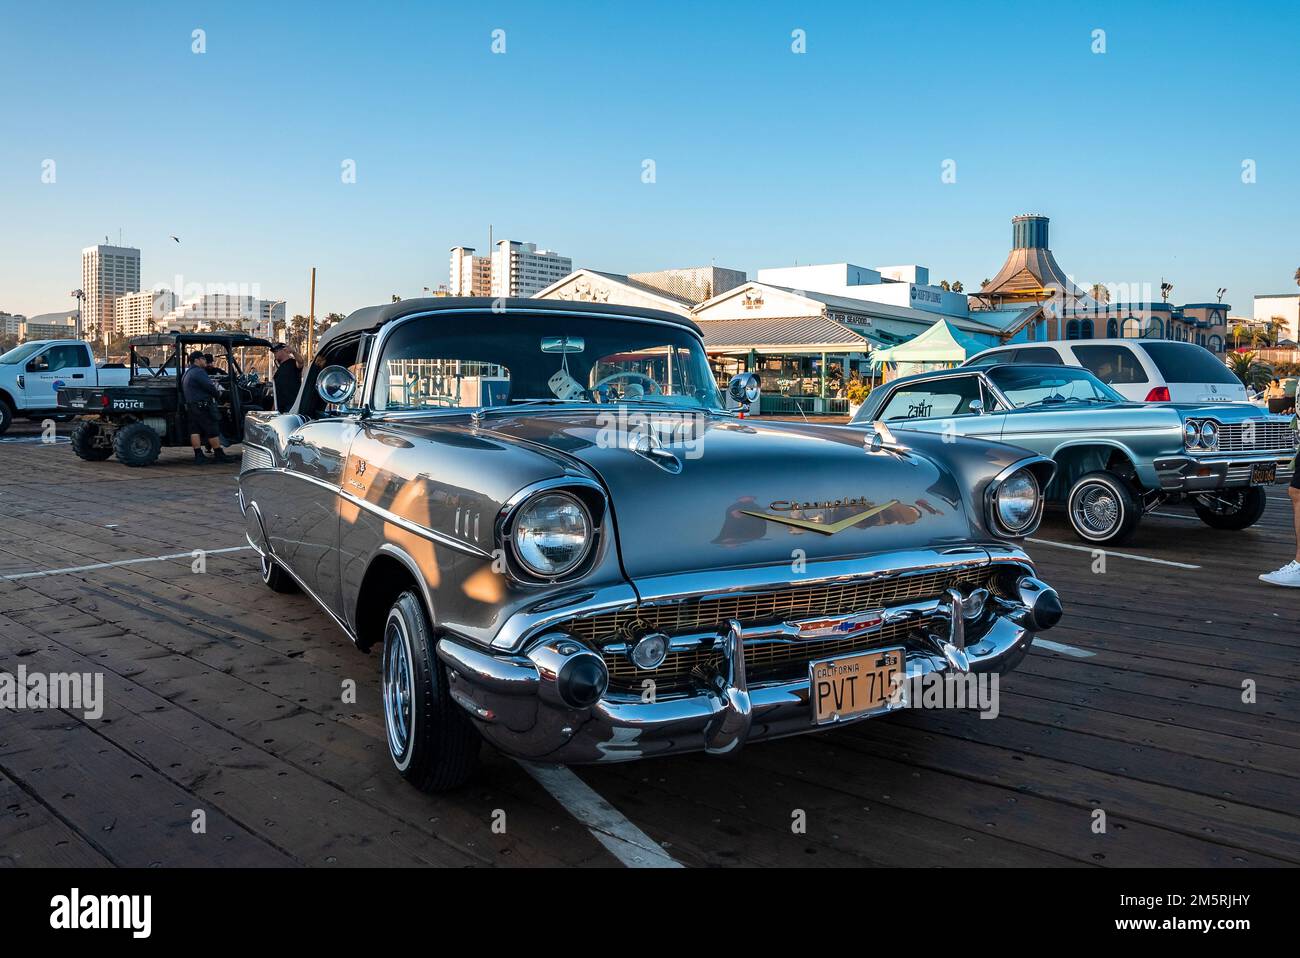 Classic blue car model displayed during retro vehicle show at Santa Monica pier Stock Photo